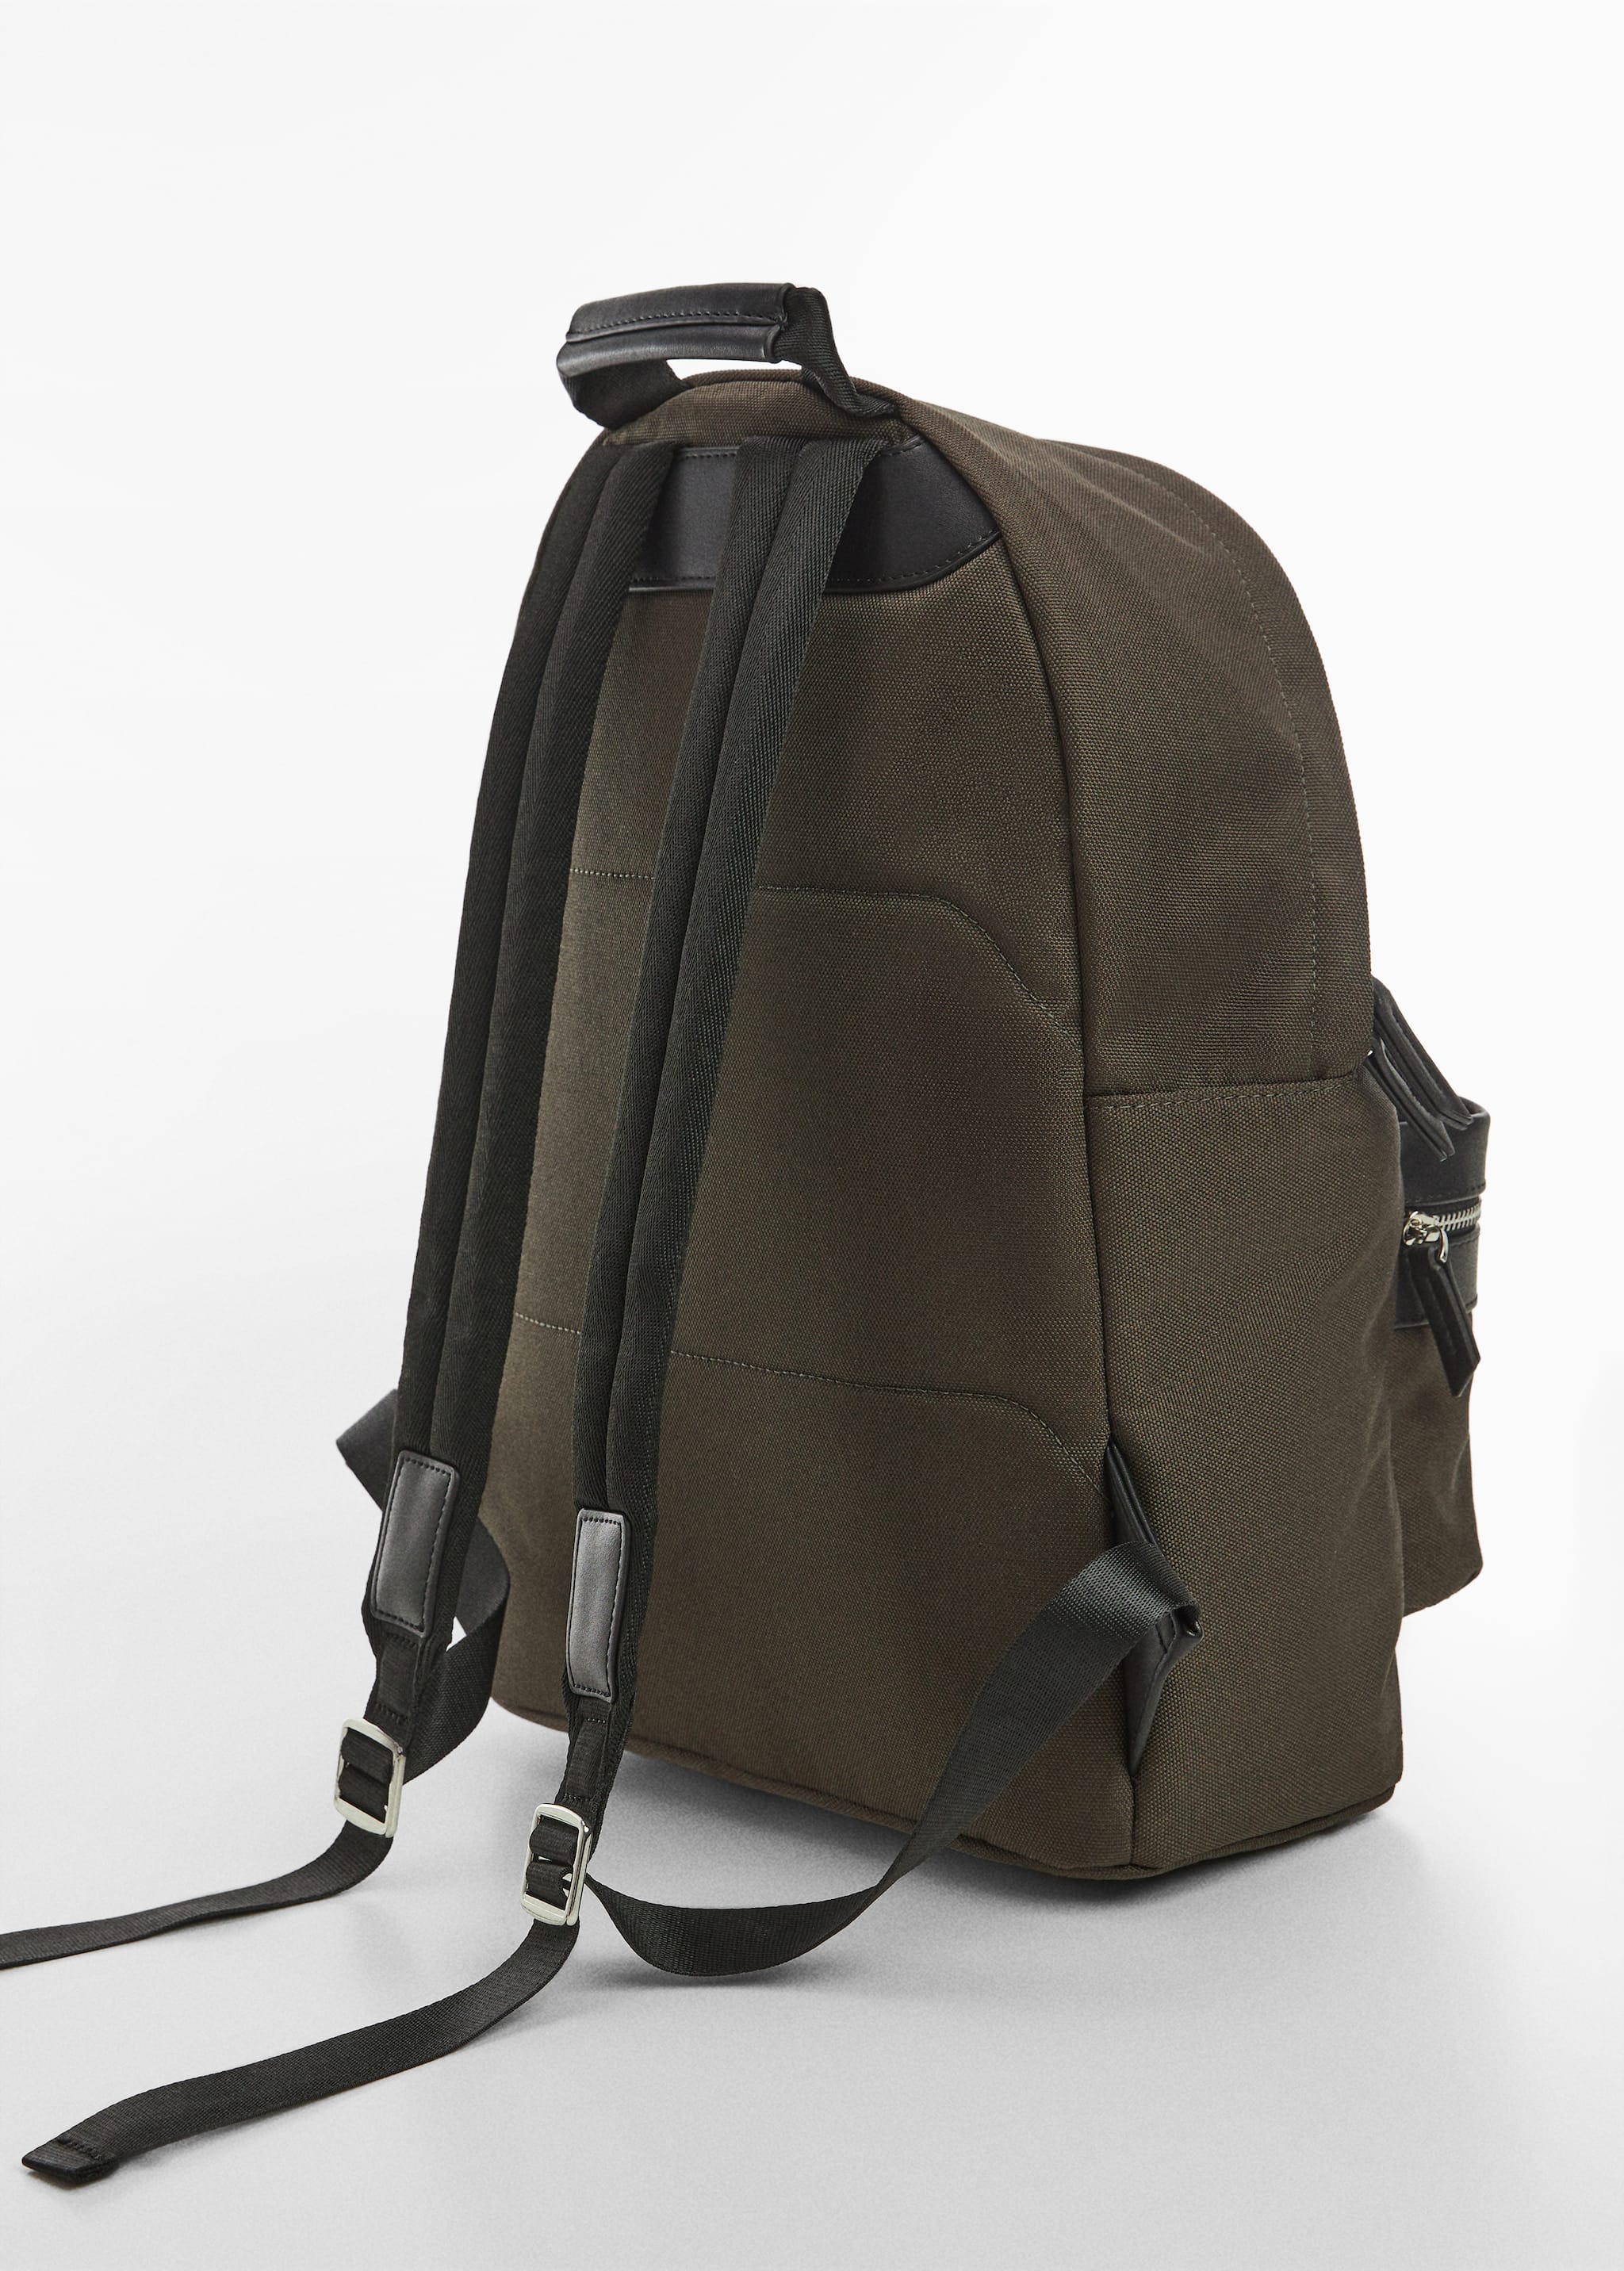 Backpack with leather-effect details - Medium plane